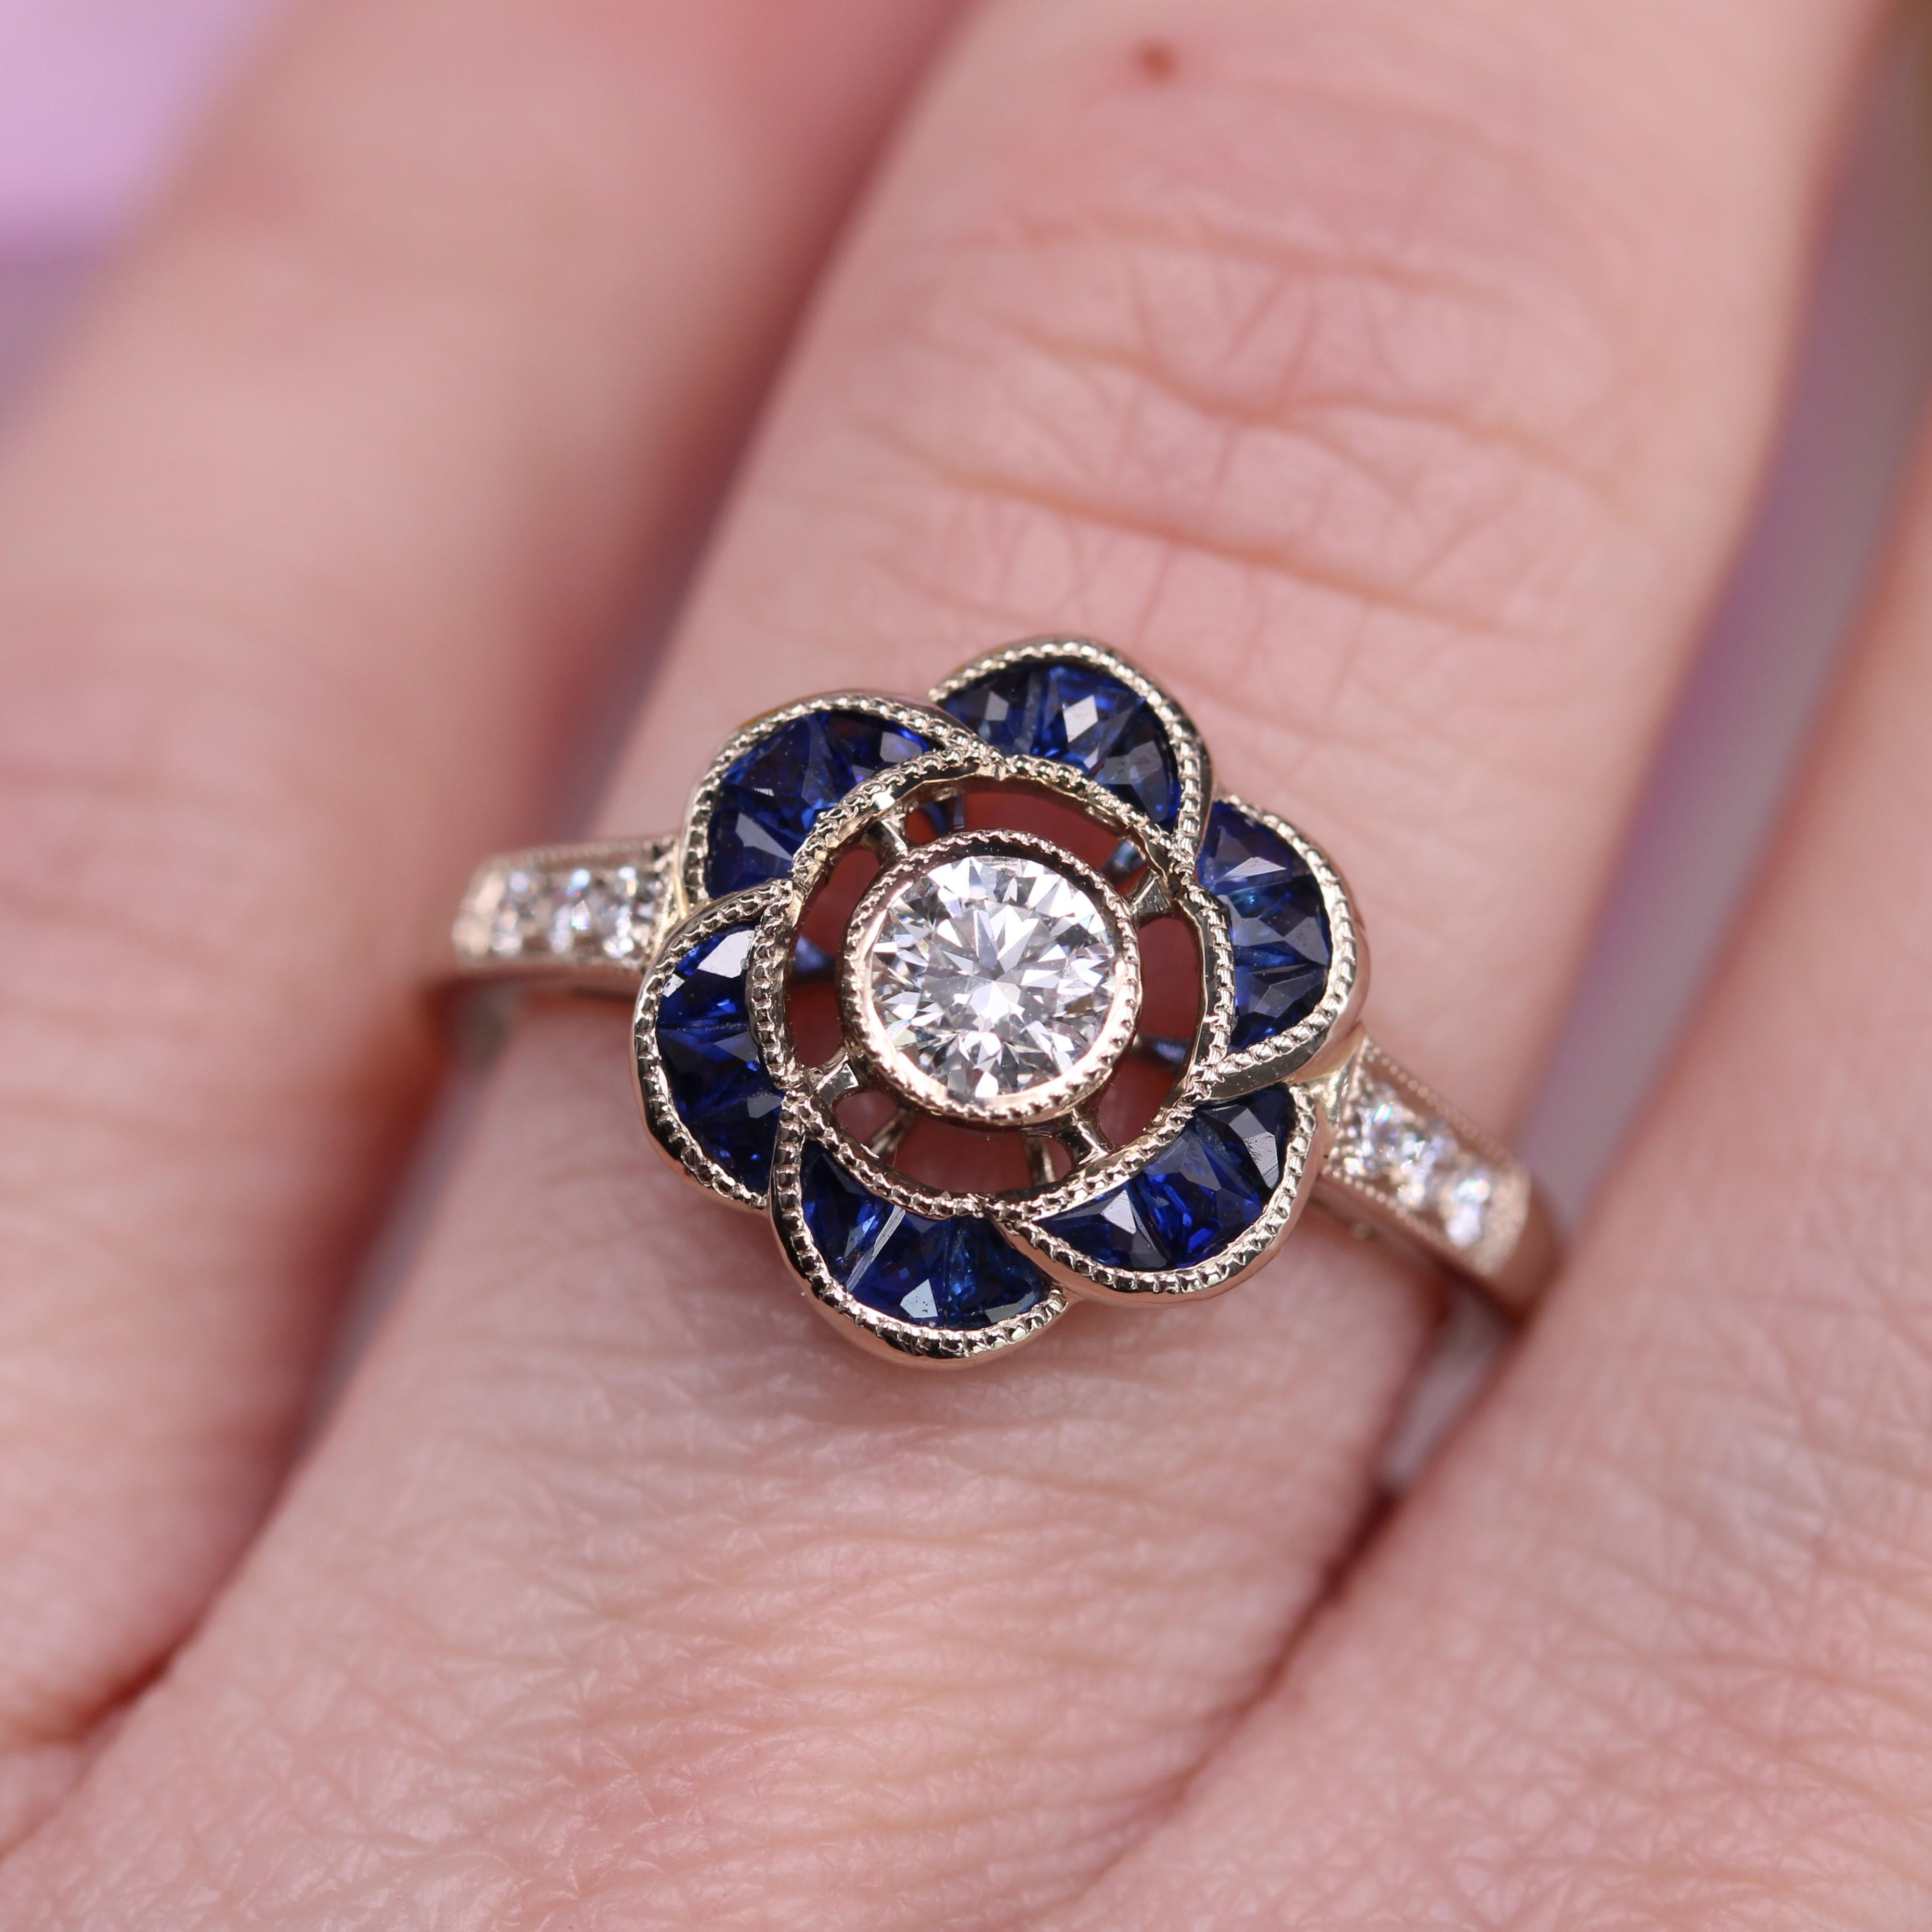 New Art Deco Style Calibrated Sapphires Diamonds 18 K White Gold Flower Ring For Sale 1